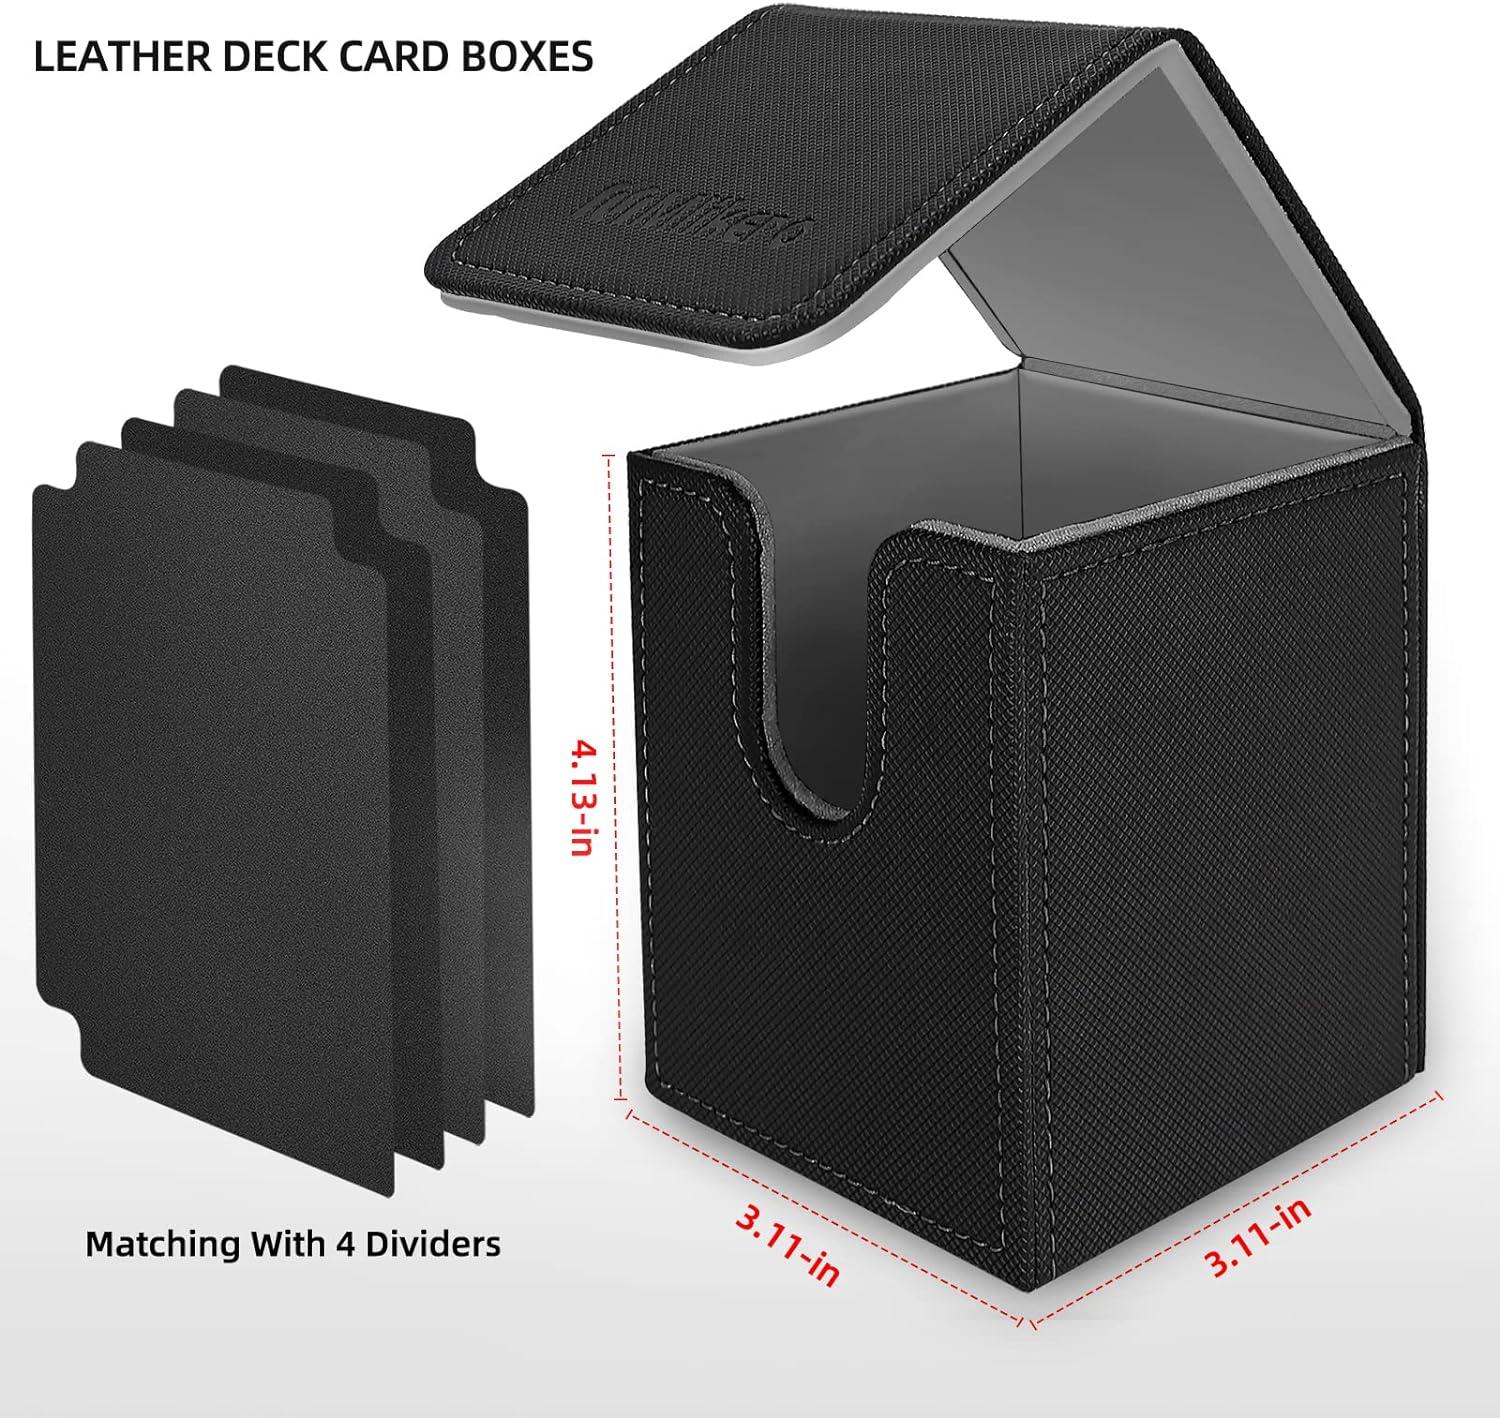 Mlikero Card Deck Cases, 6 Pack Acrylic Card Box for Trading Cards